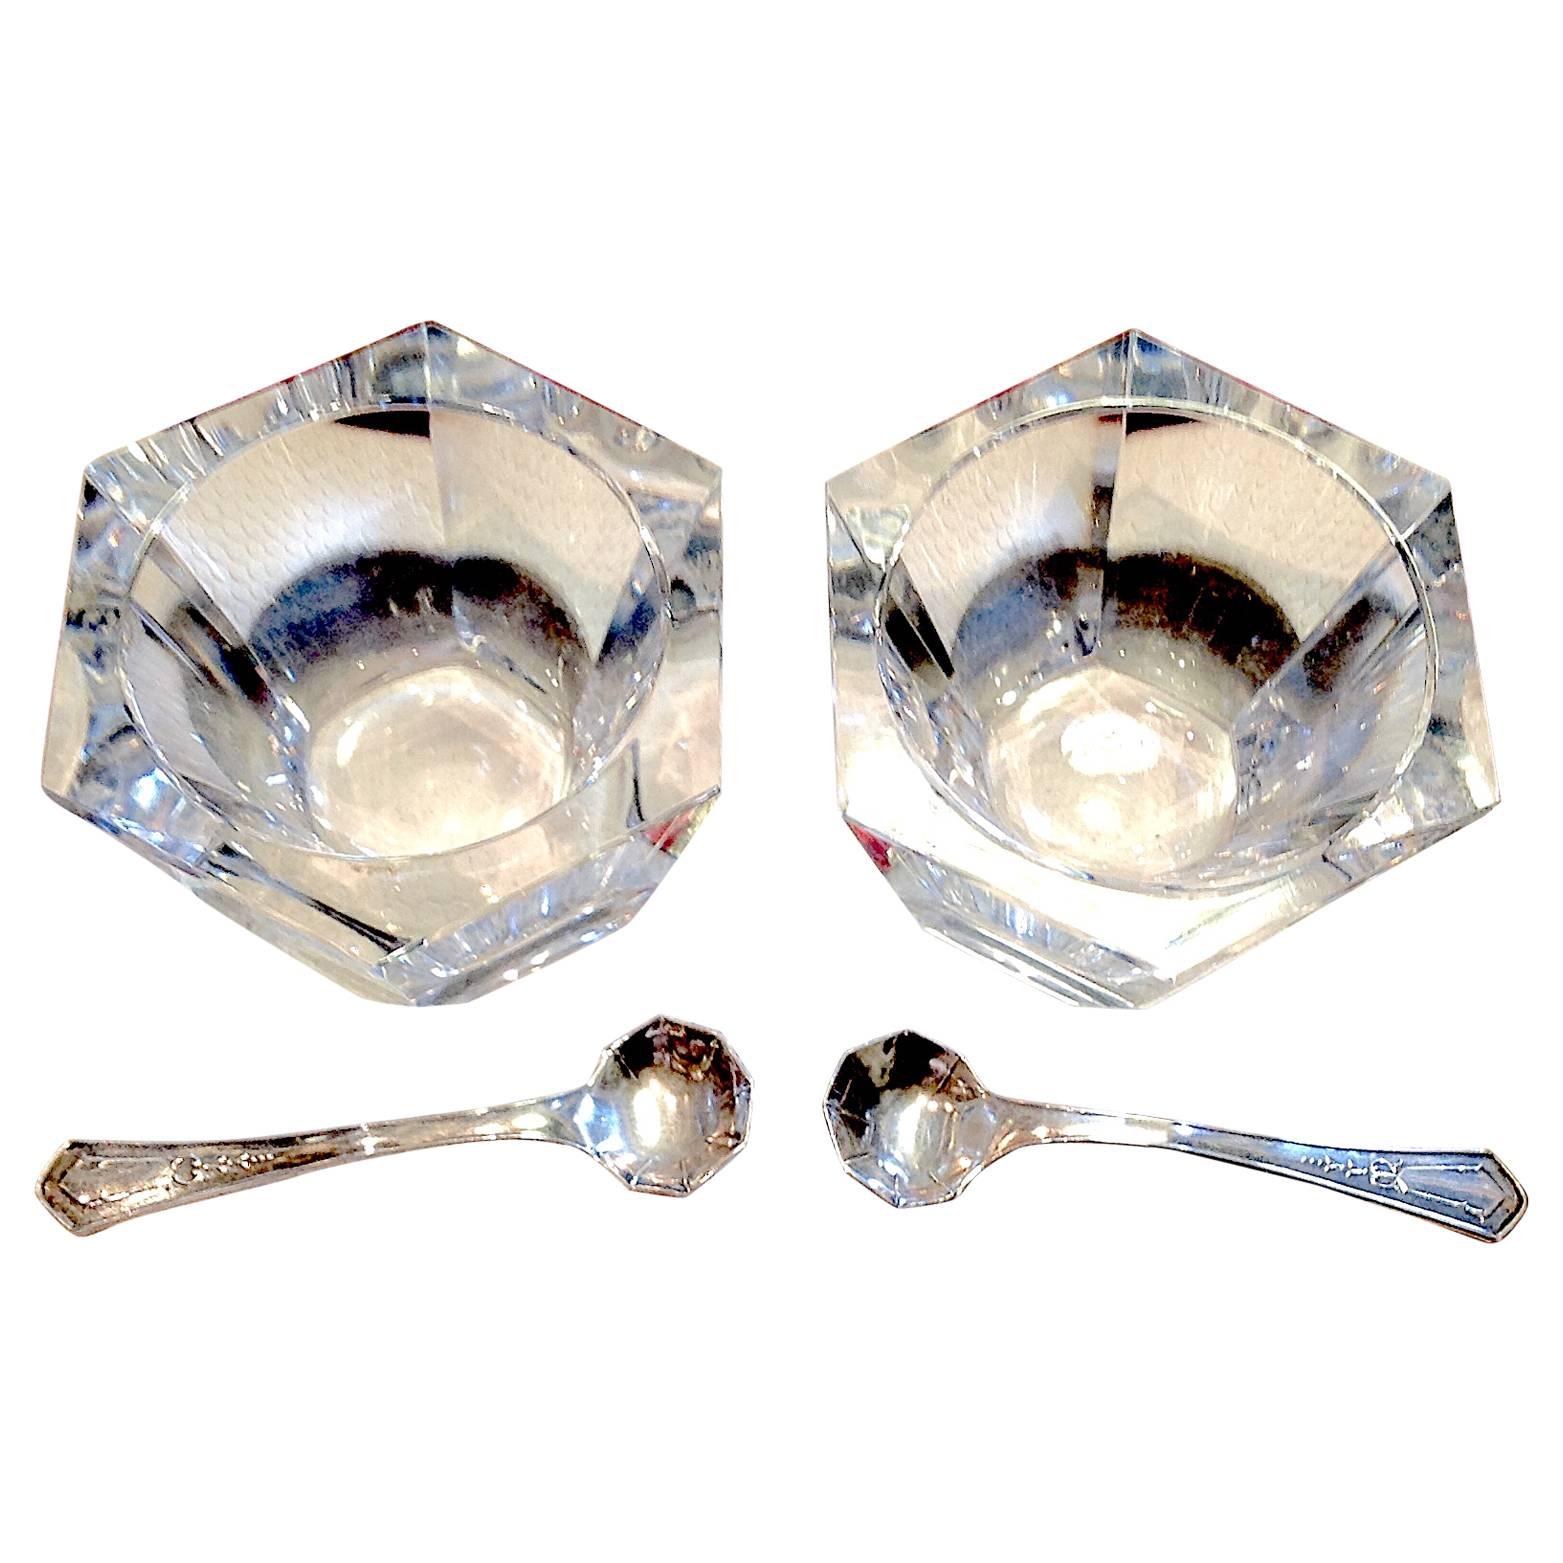 Pair of Baccarat Crystal Salt Cellars with Silver Spoon